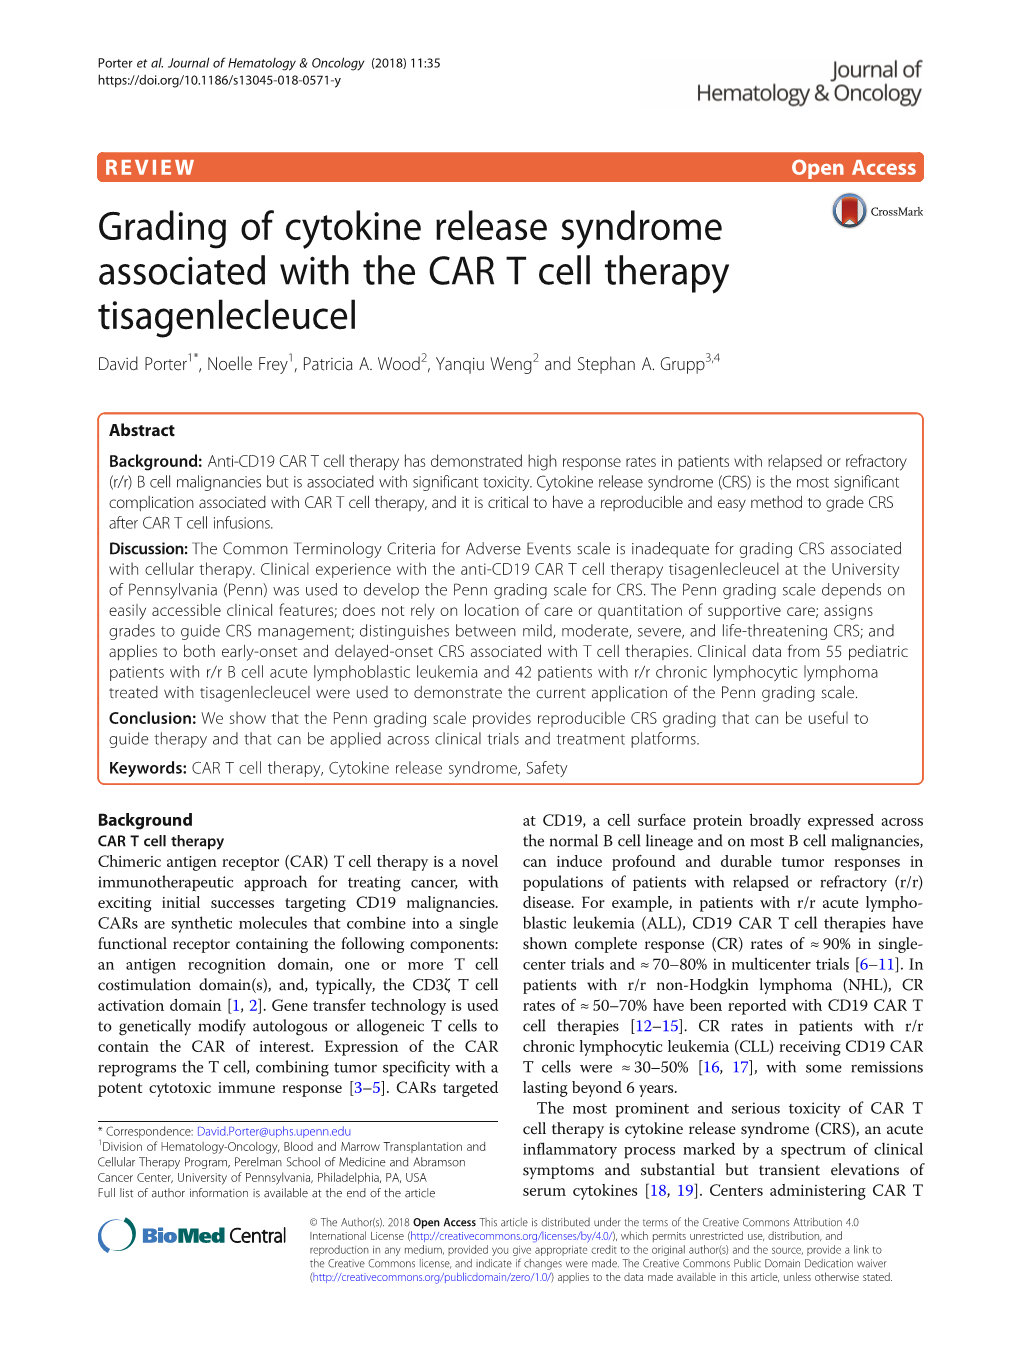 Grading of Cytokine Release Syndrome Associated with the CAR T Cell Therapy Tisagenlecleucel David Porter1*, Noelle Frey1, Patricia A